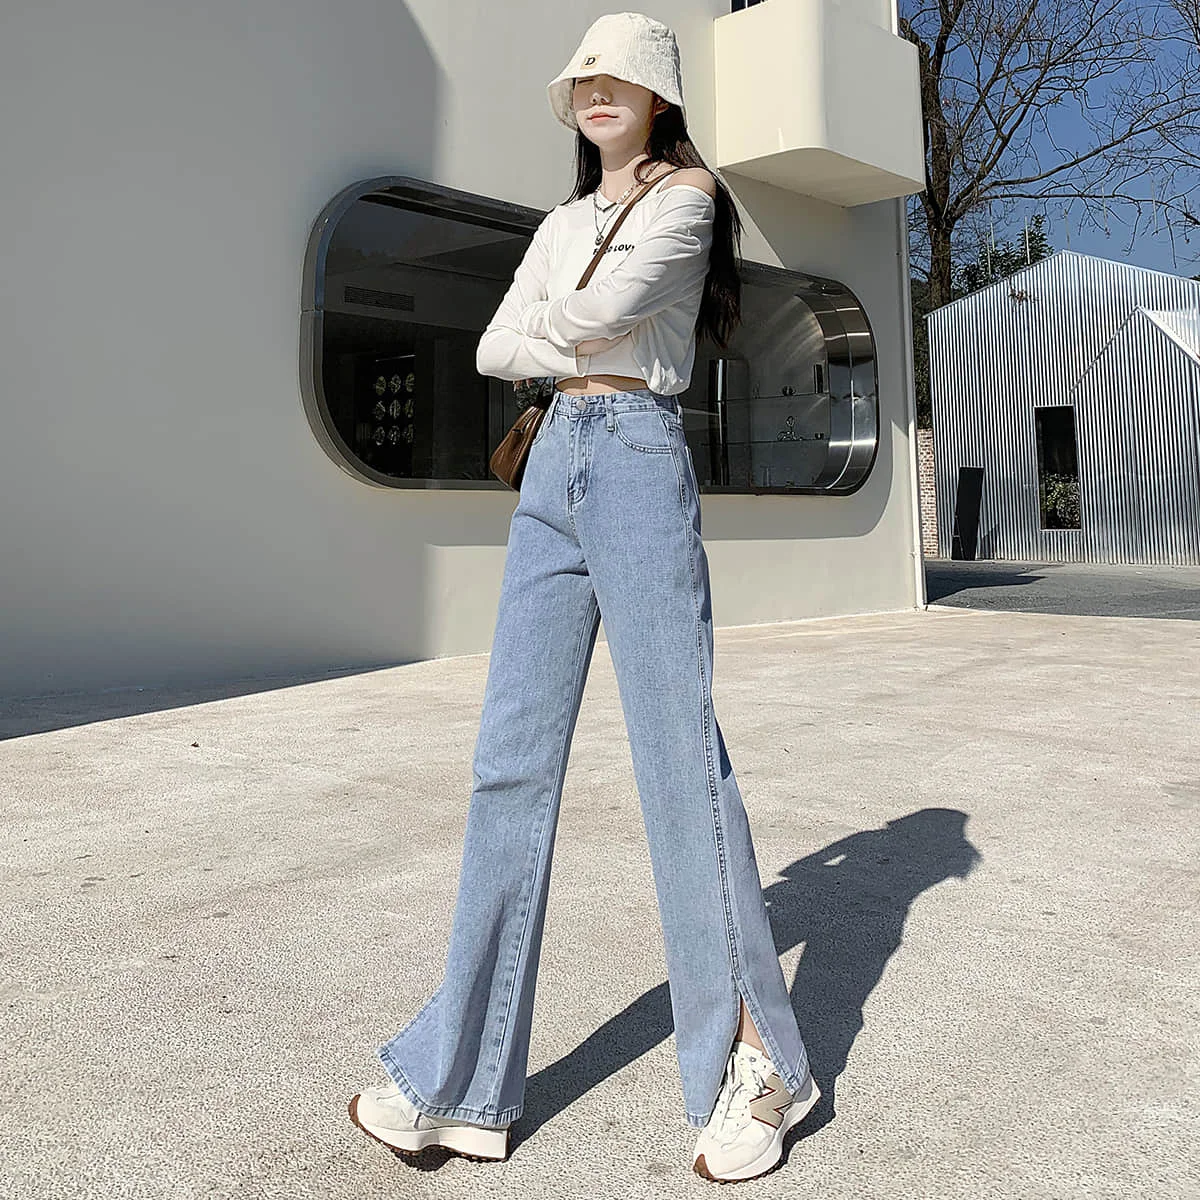 Woman Classic Jeans Luxury Brand Acne Ac Studios Girls Street Fashion Pants High Waist Jeans Washed Denim Full Jeans for Lady